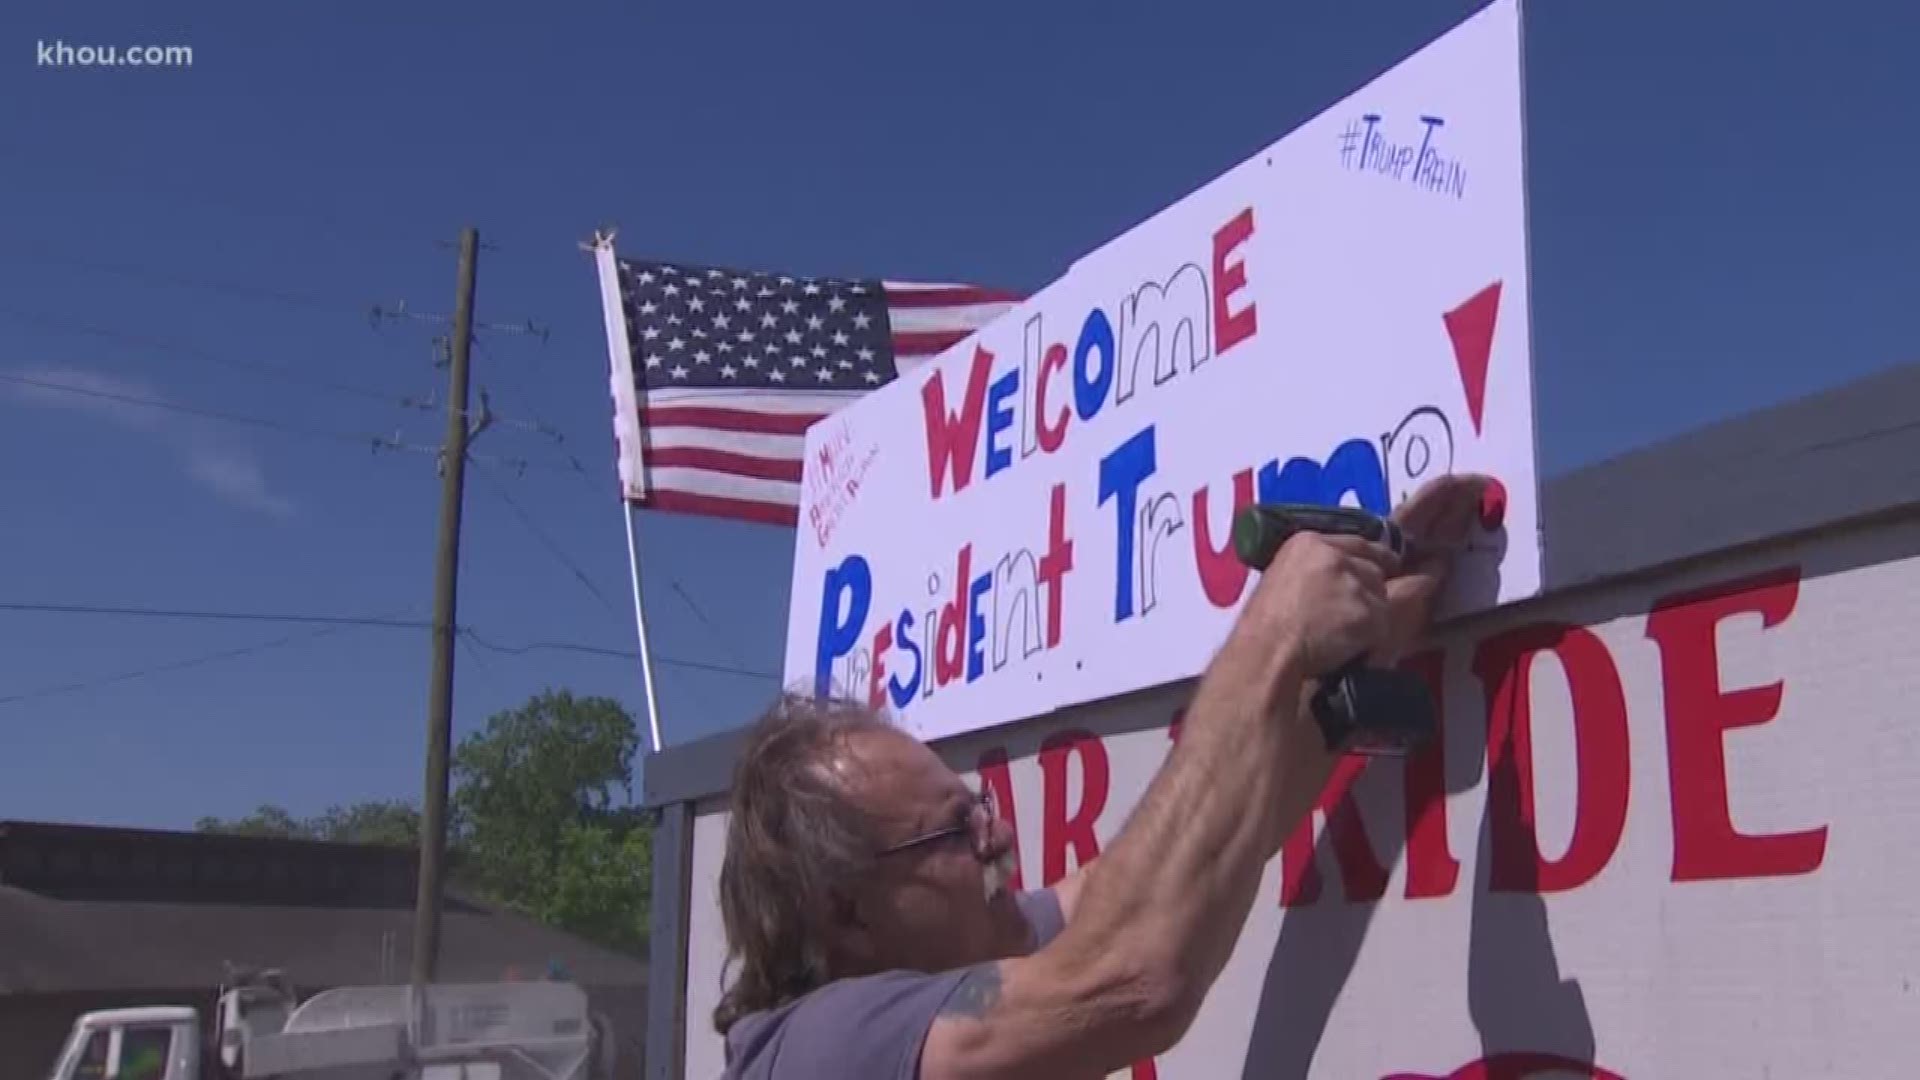 Residents in the small city of Crosby were gearing up early for the historic presidential visit.